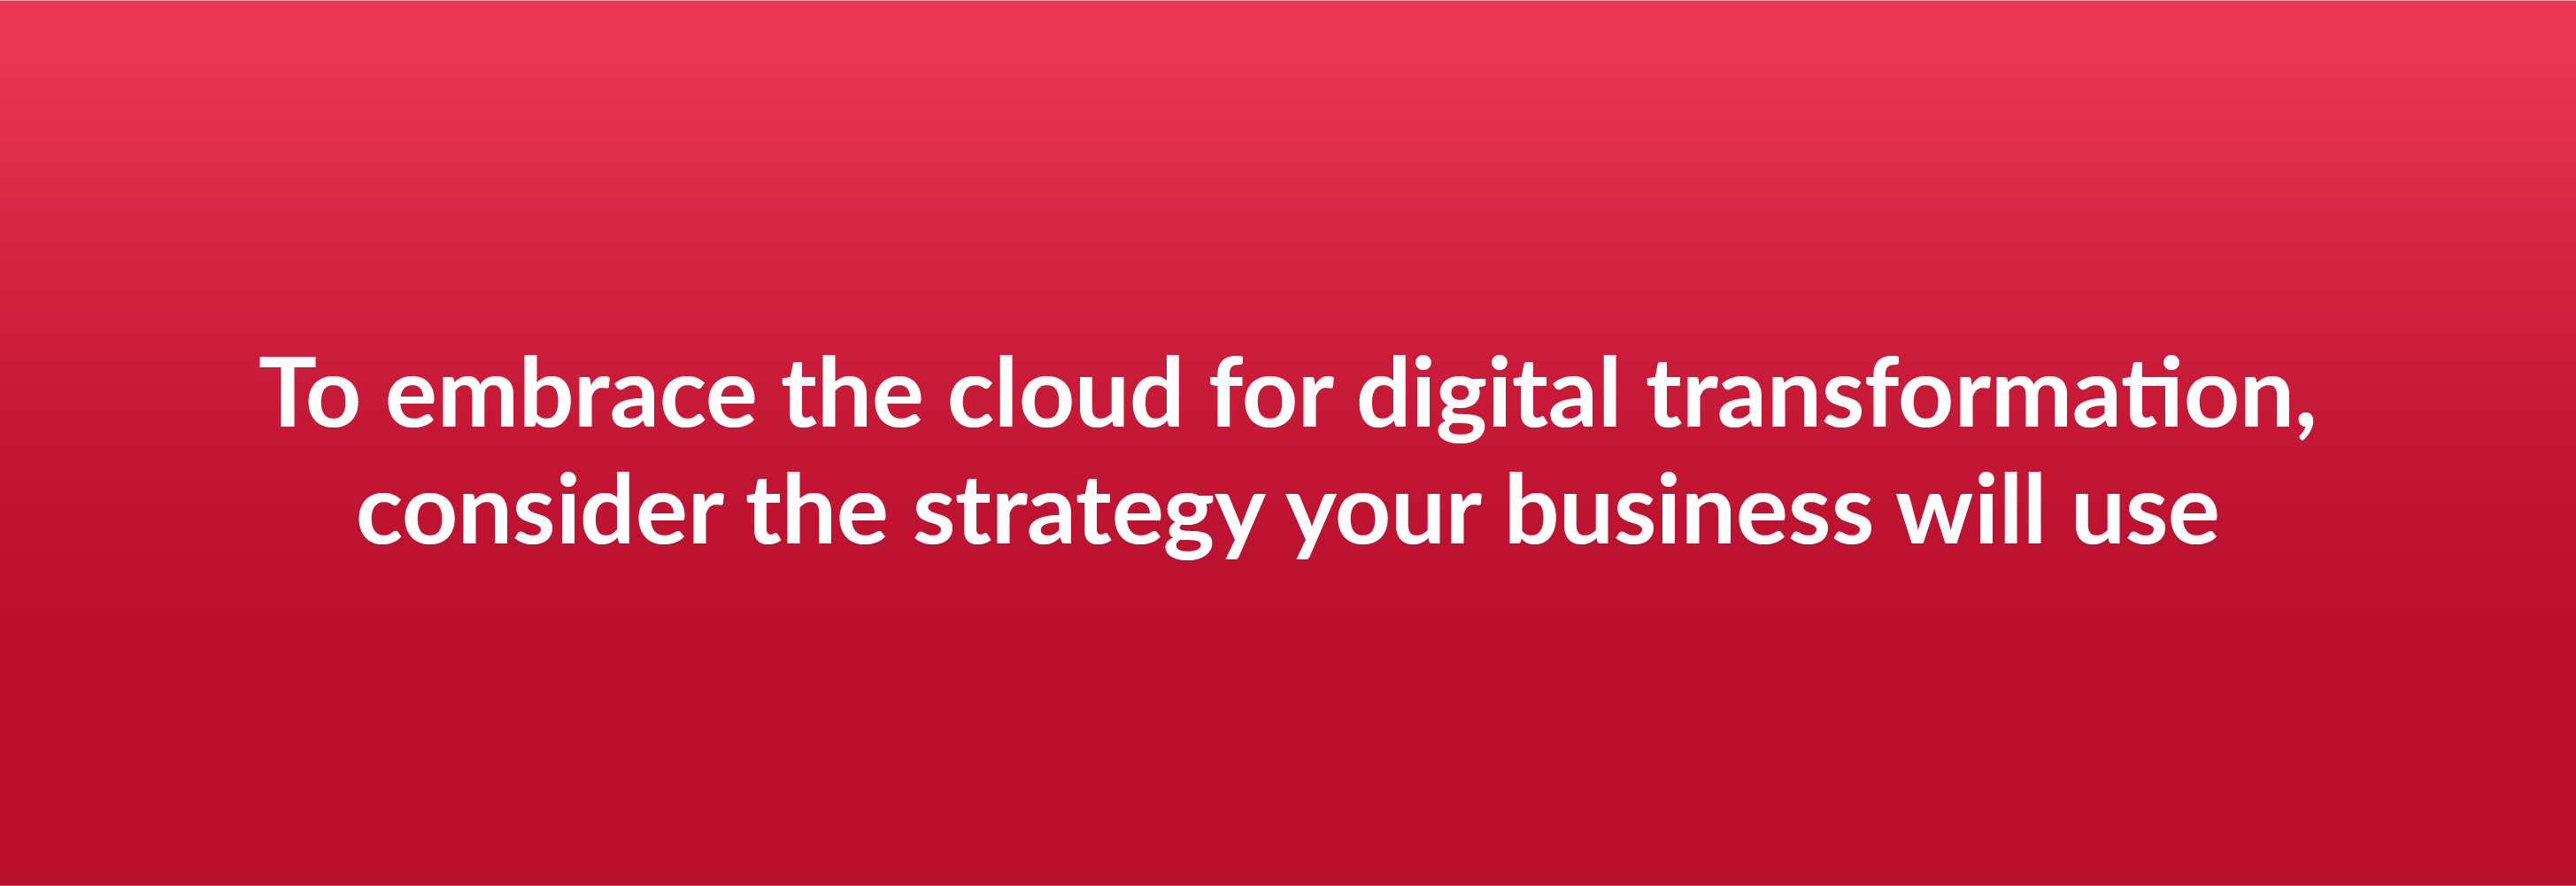 To embrace the cloud for digital transformation, consider the strategy your business will use